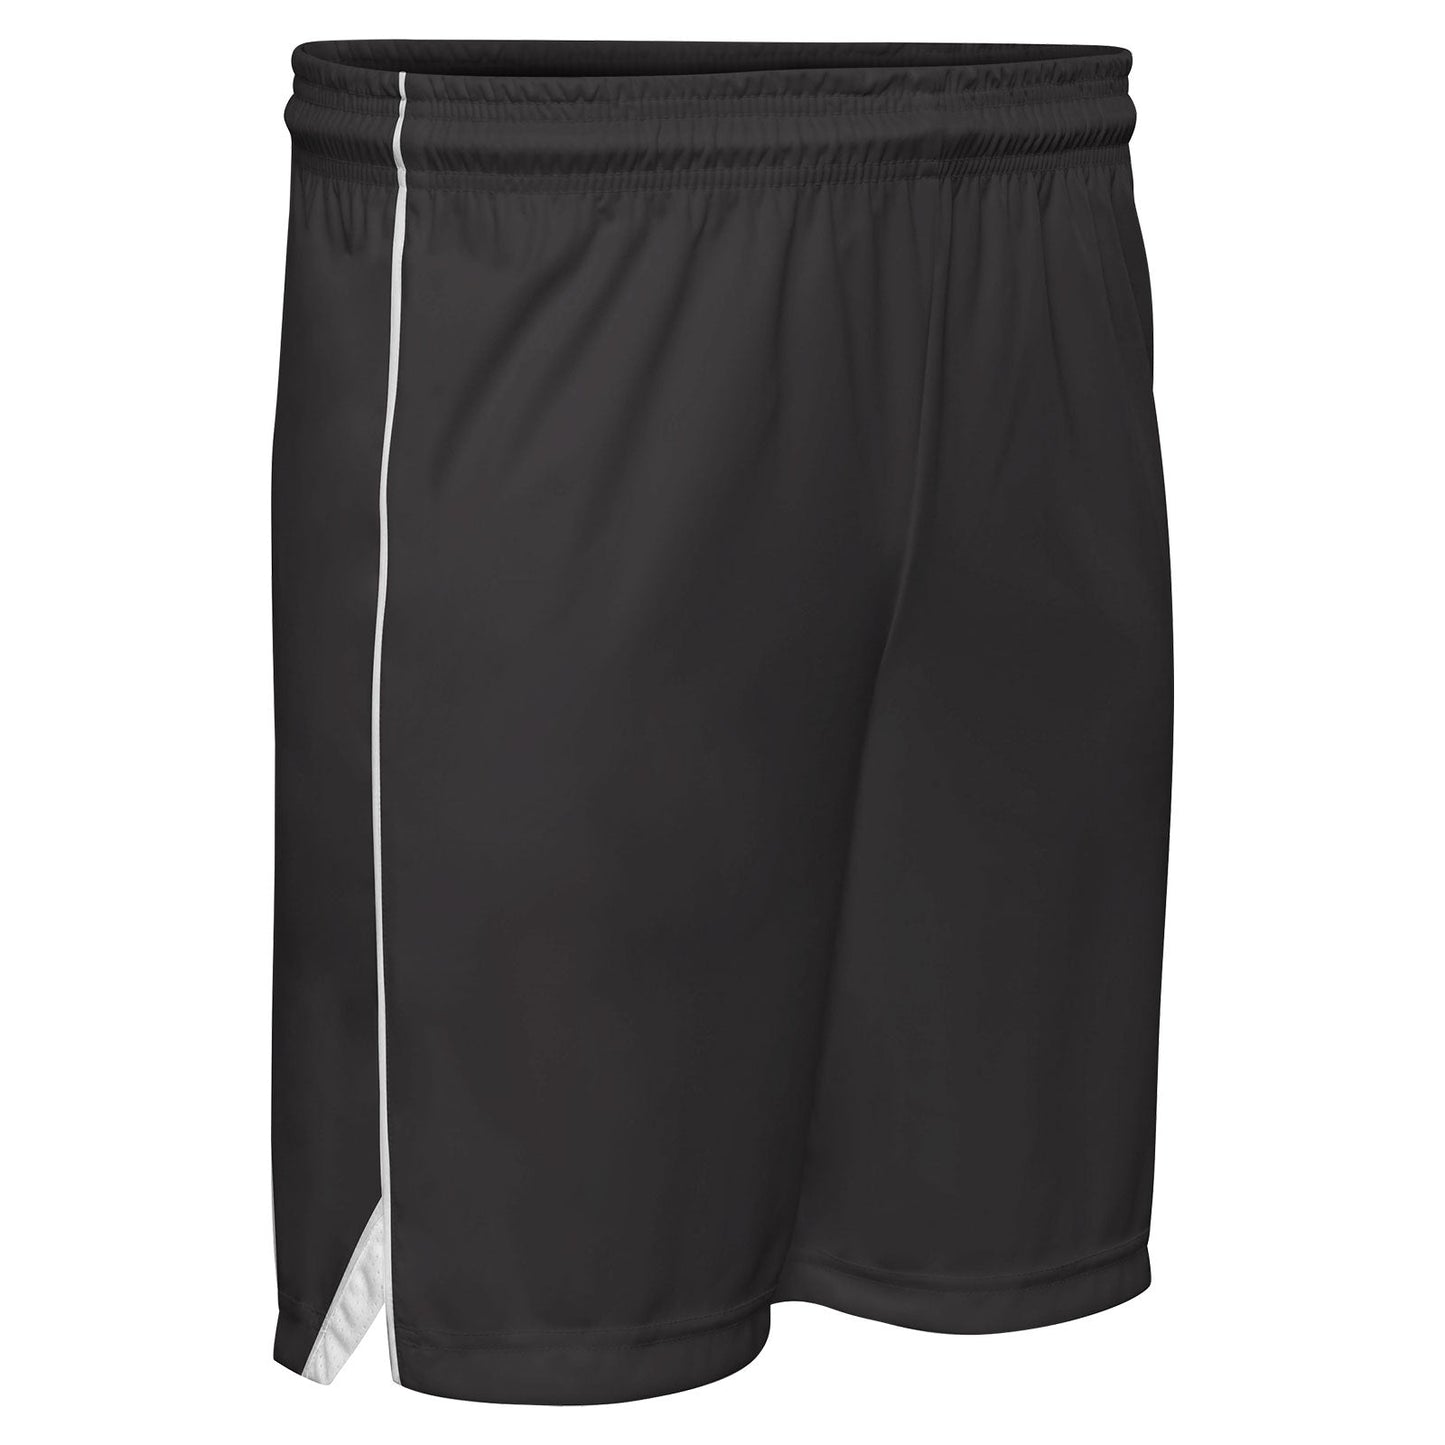 Elite Moisture Wicking Womens Basketball Short With Side Piping, Adult